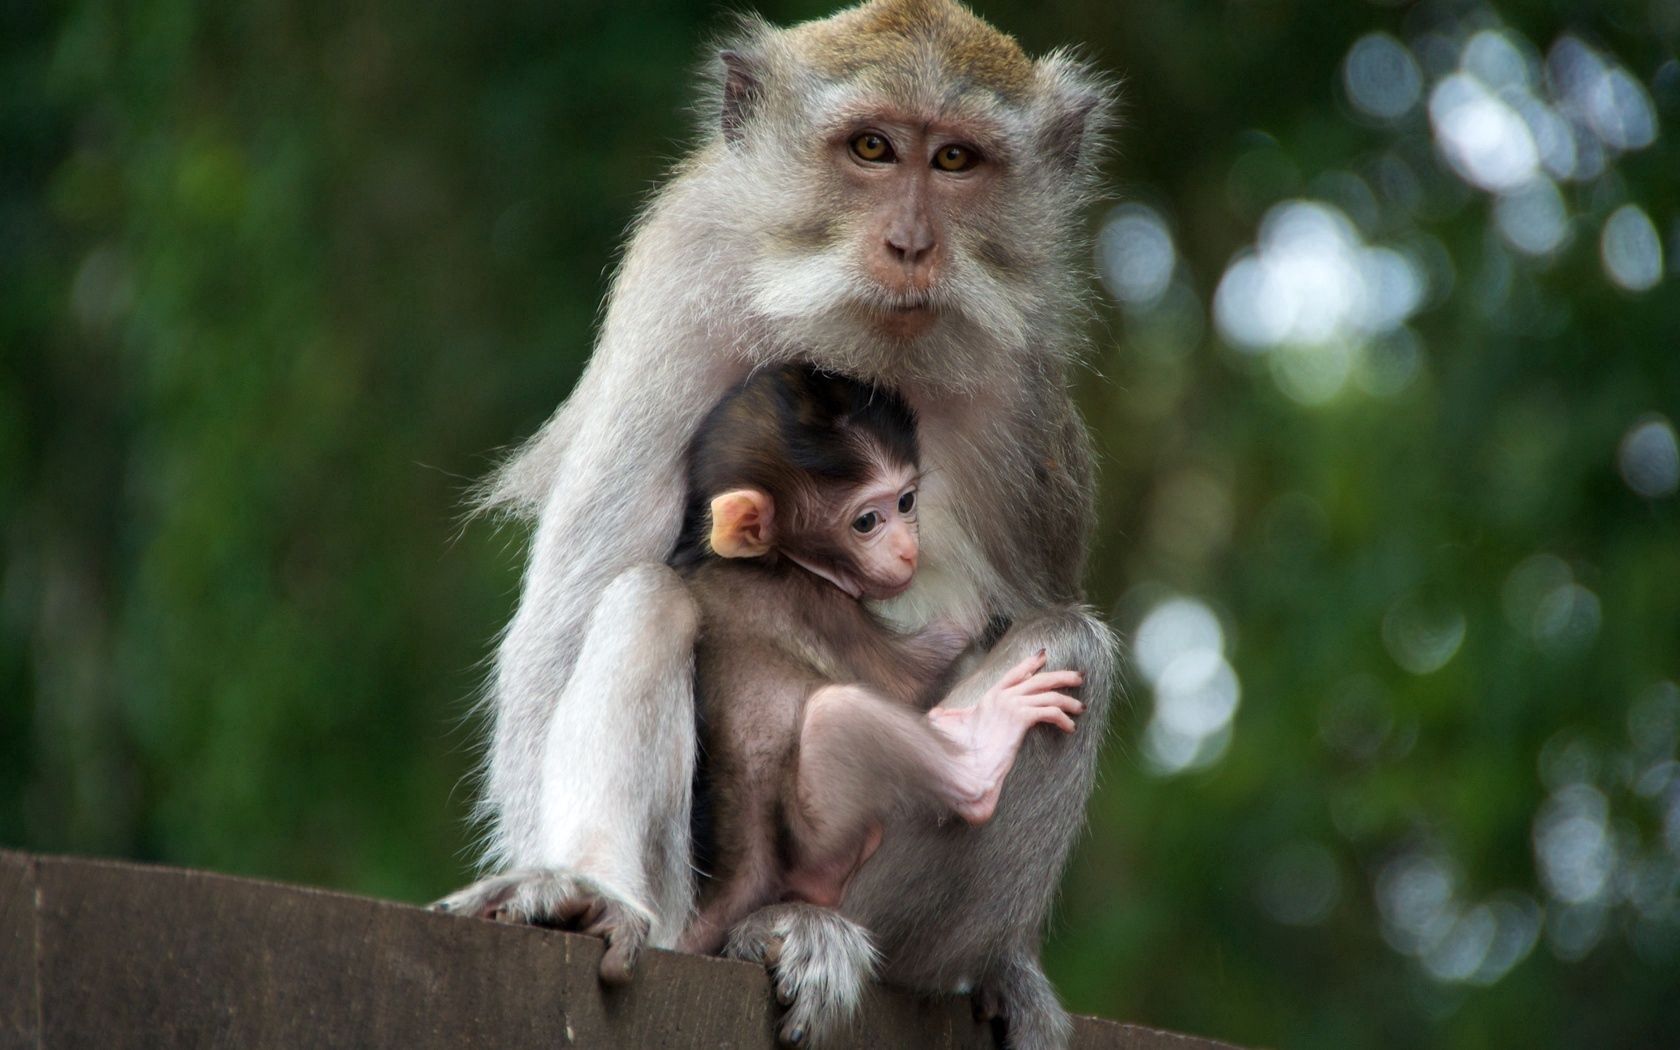 care, family, animals, young, monkey, joey, tenderness